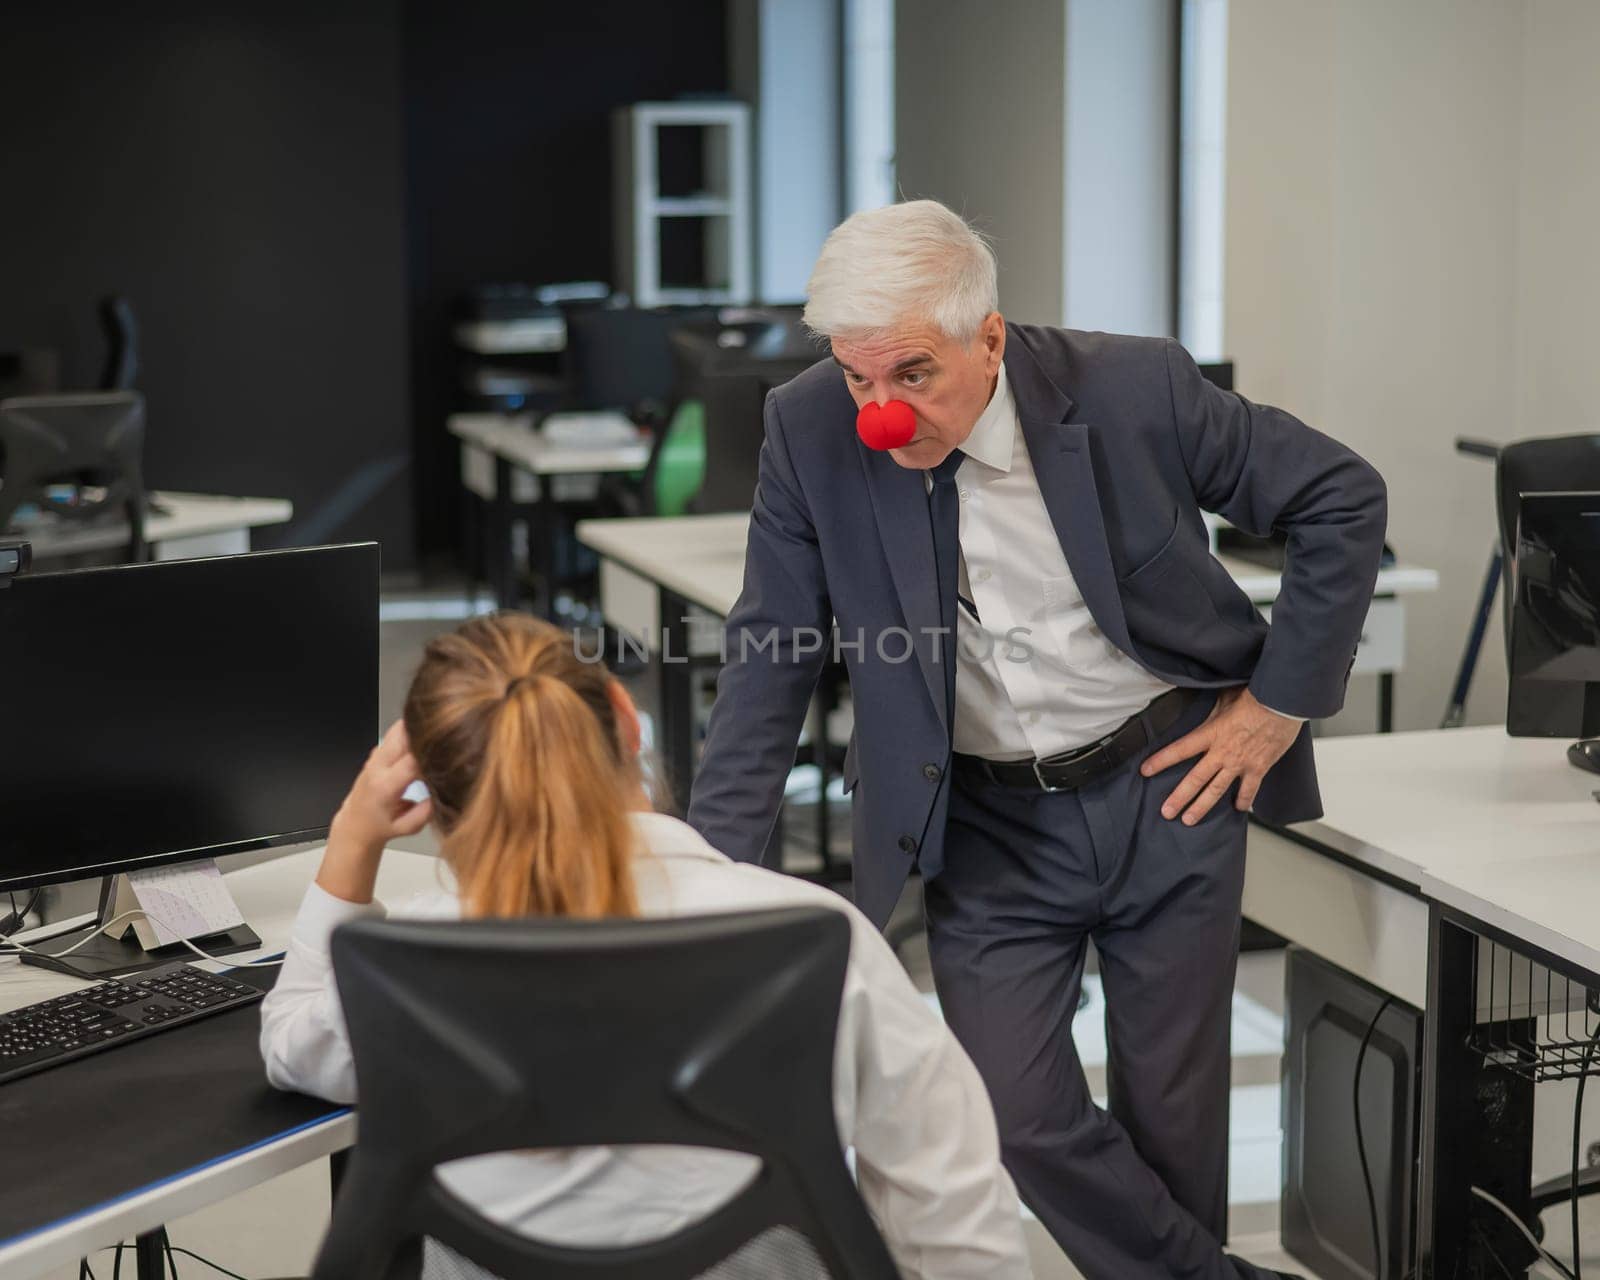 Elderly Caucasian man wearing a clown nose swears at his subordinate in the office. by mrwed54